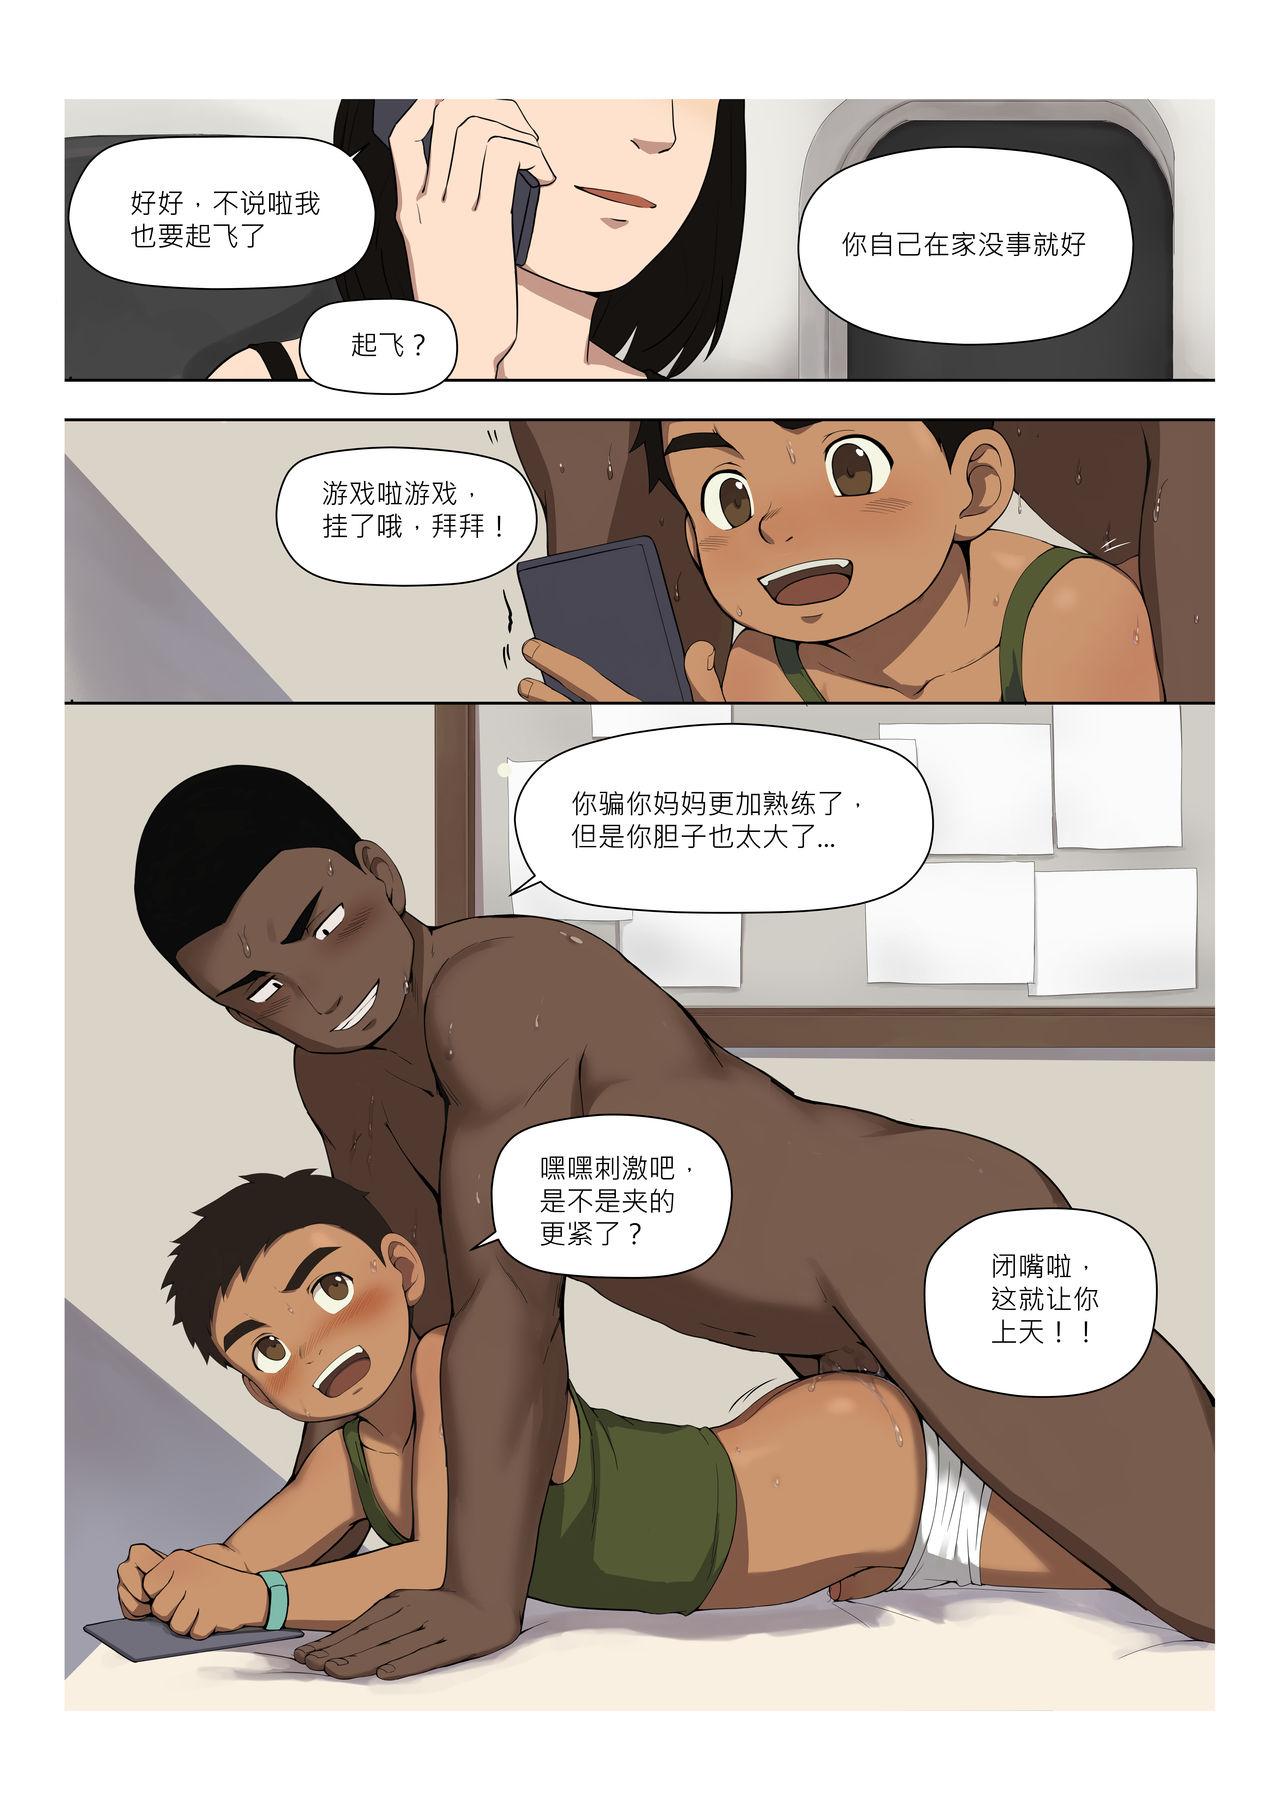 Spooning Reap What You Sow - 自业自得 Dick Suck - Page 42